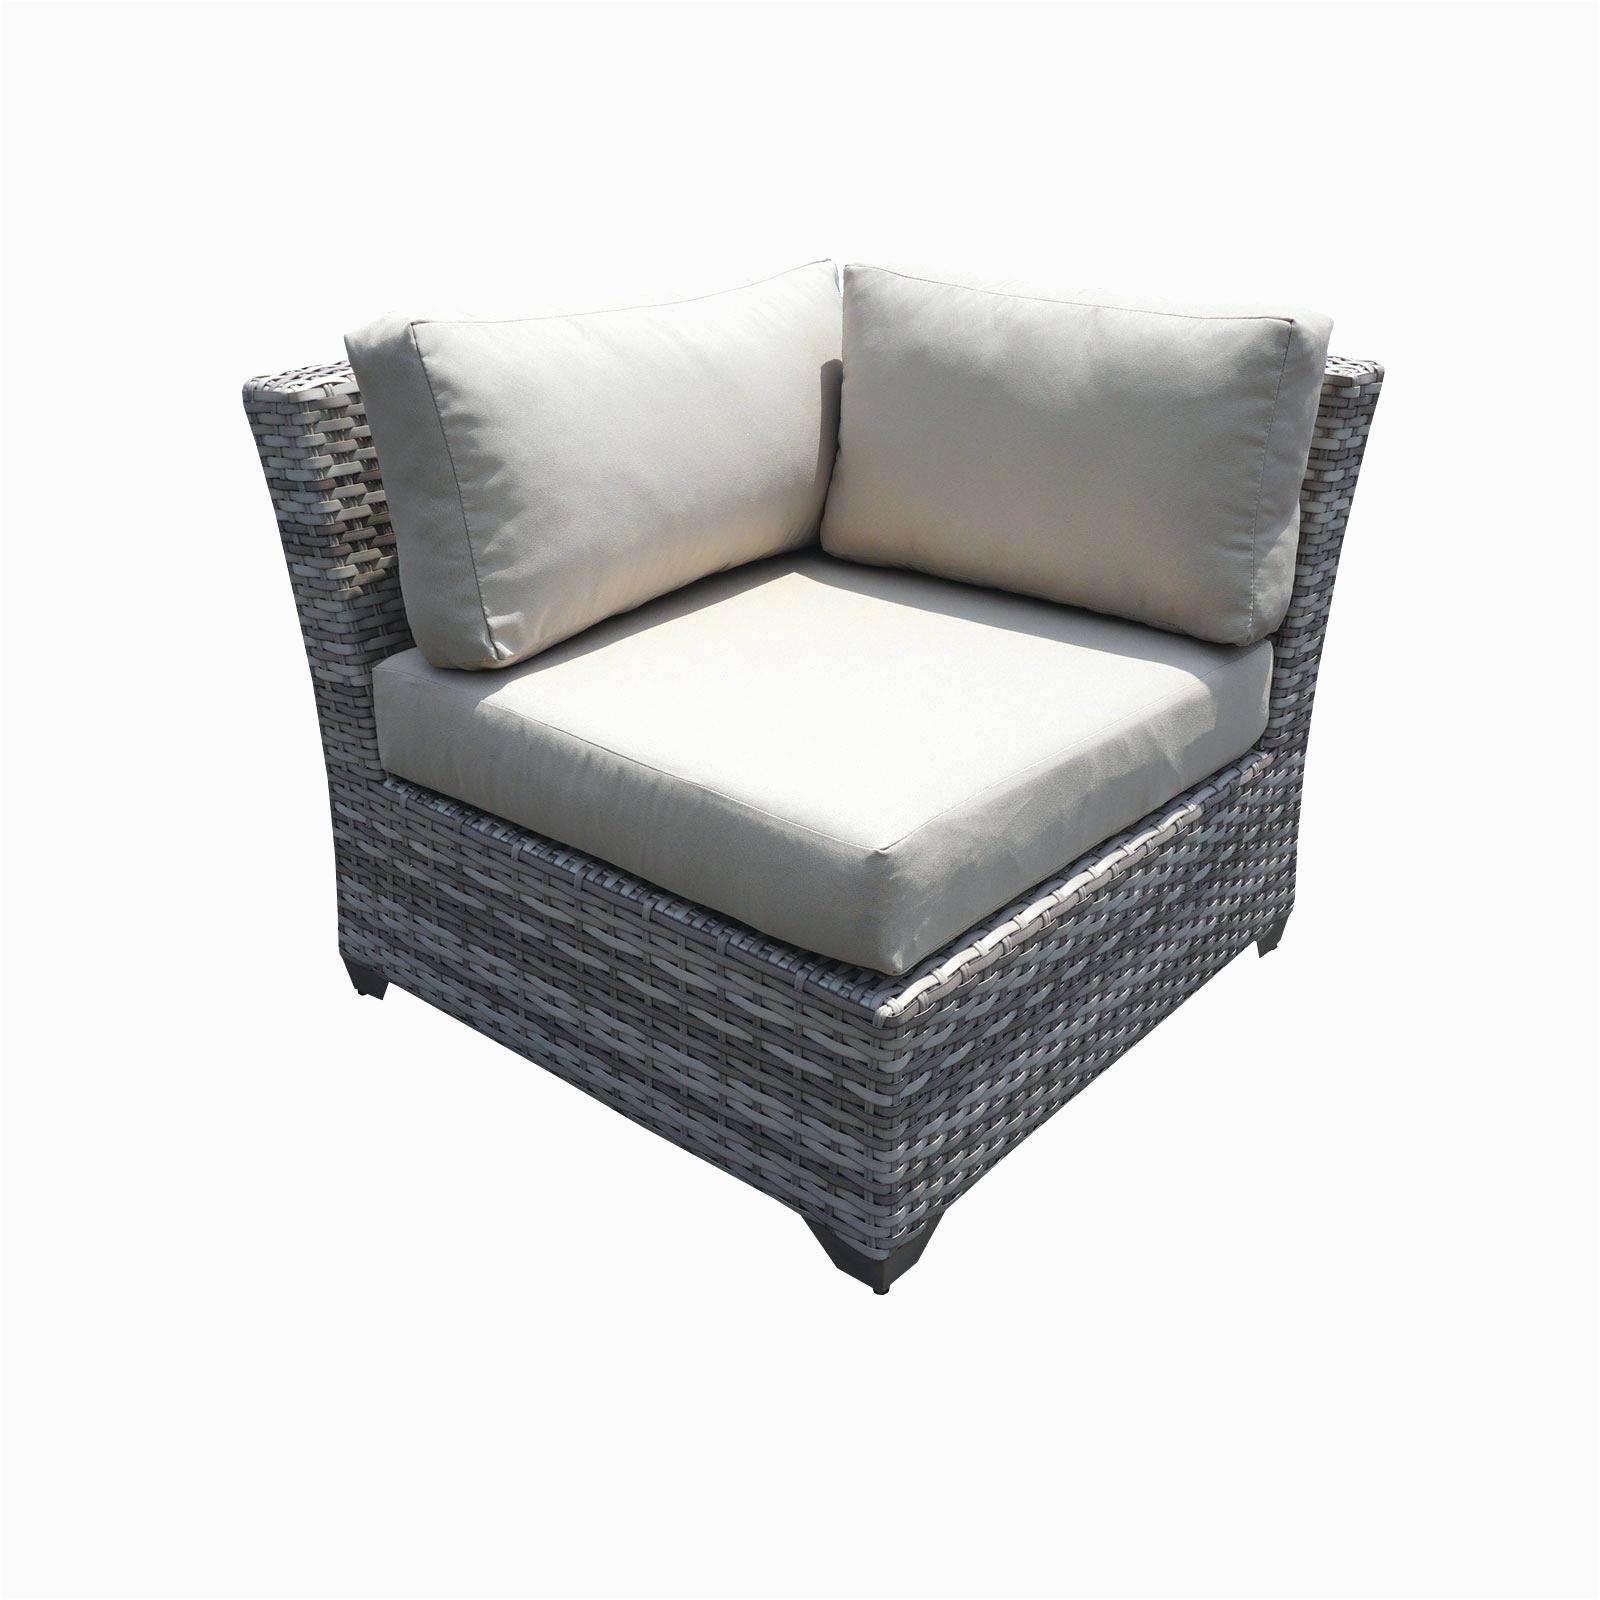 so home furniture lovely home design oversized patio chairs luxury wicker outdoor sofa 0d